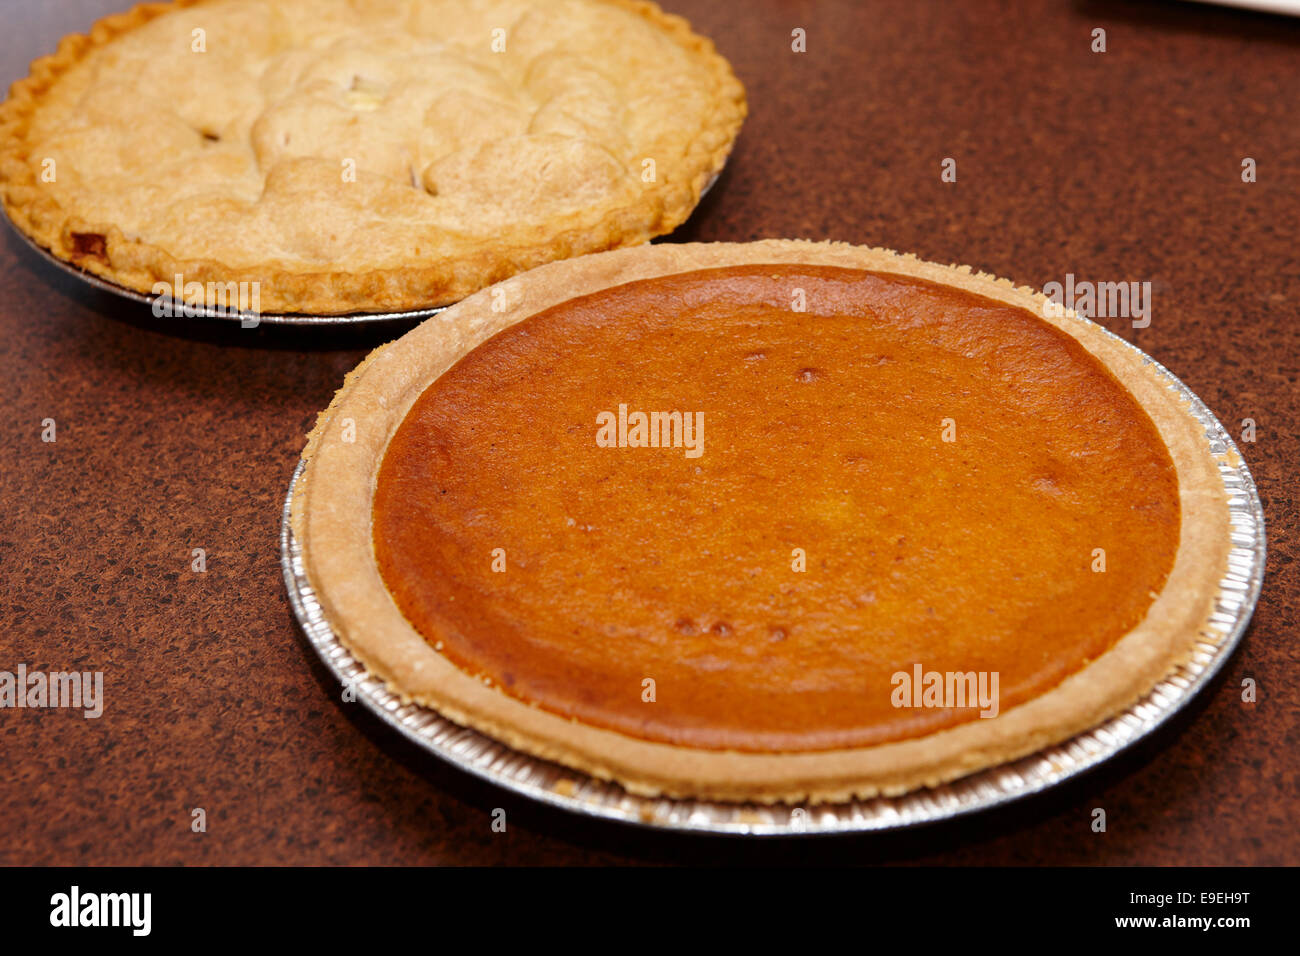 large round mass produced pumpkin and apple pies Stock Photo